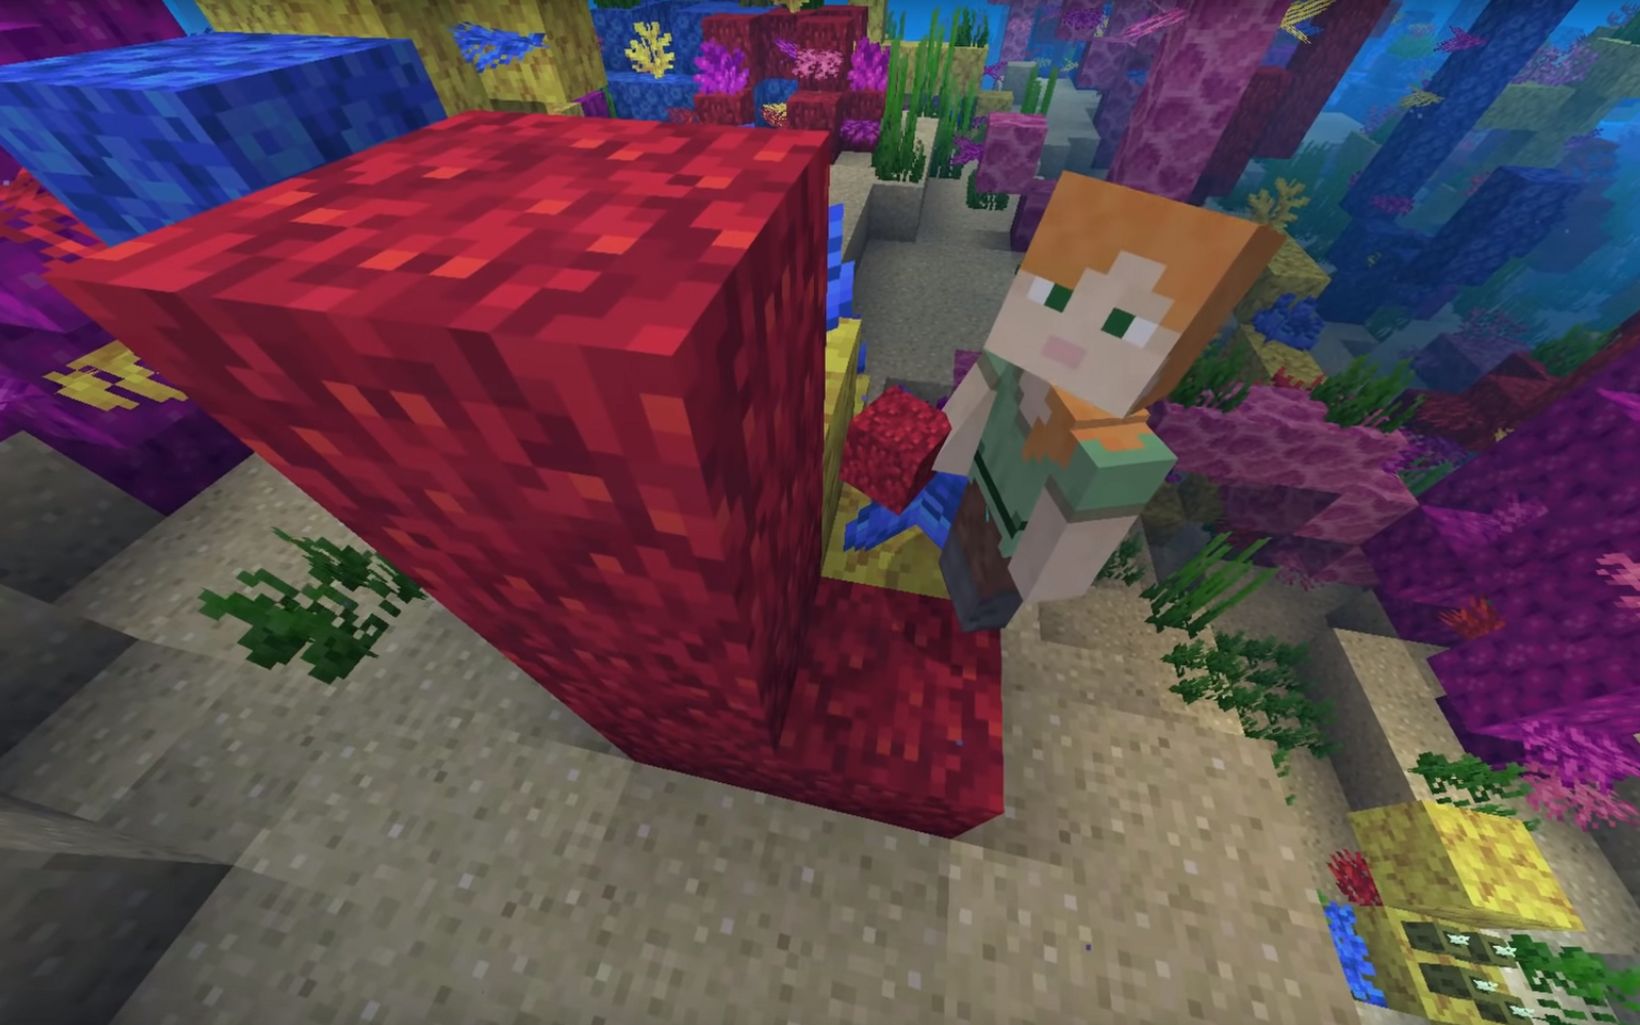 
                
                  Minecraft Minecraft’s in-game oceans include five new coral reefs to build – staghorn, brain, fire, bubble and tube. 
                  
                
              